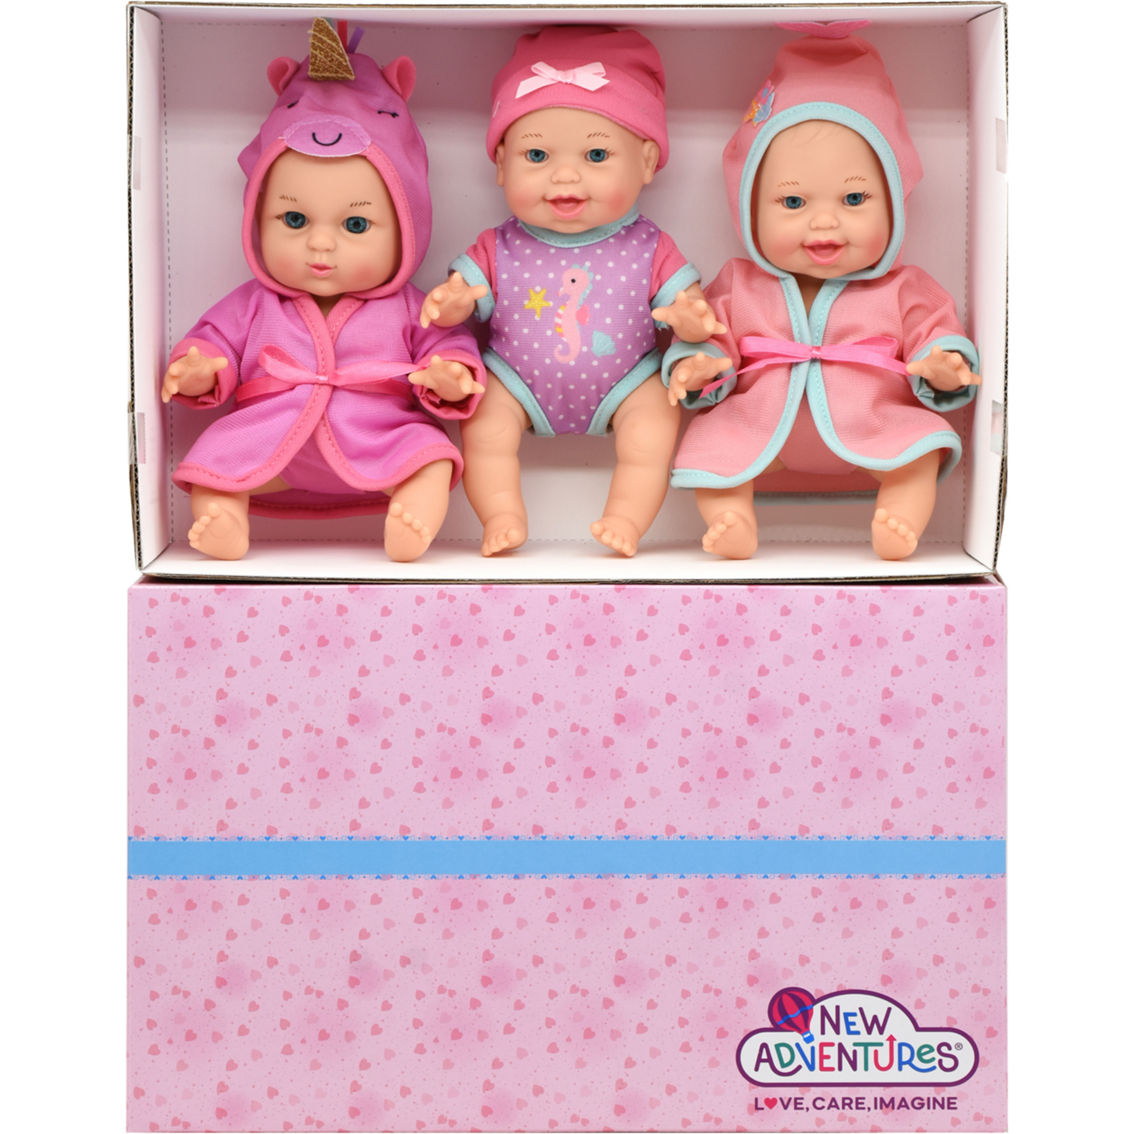 New Adventures So Much Love Baby Doll 3 pc. Playset - Image 2 of 5